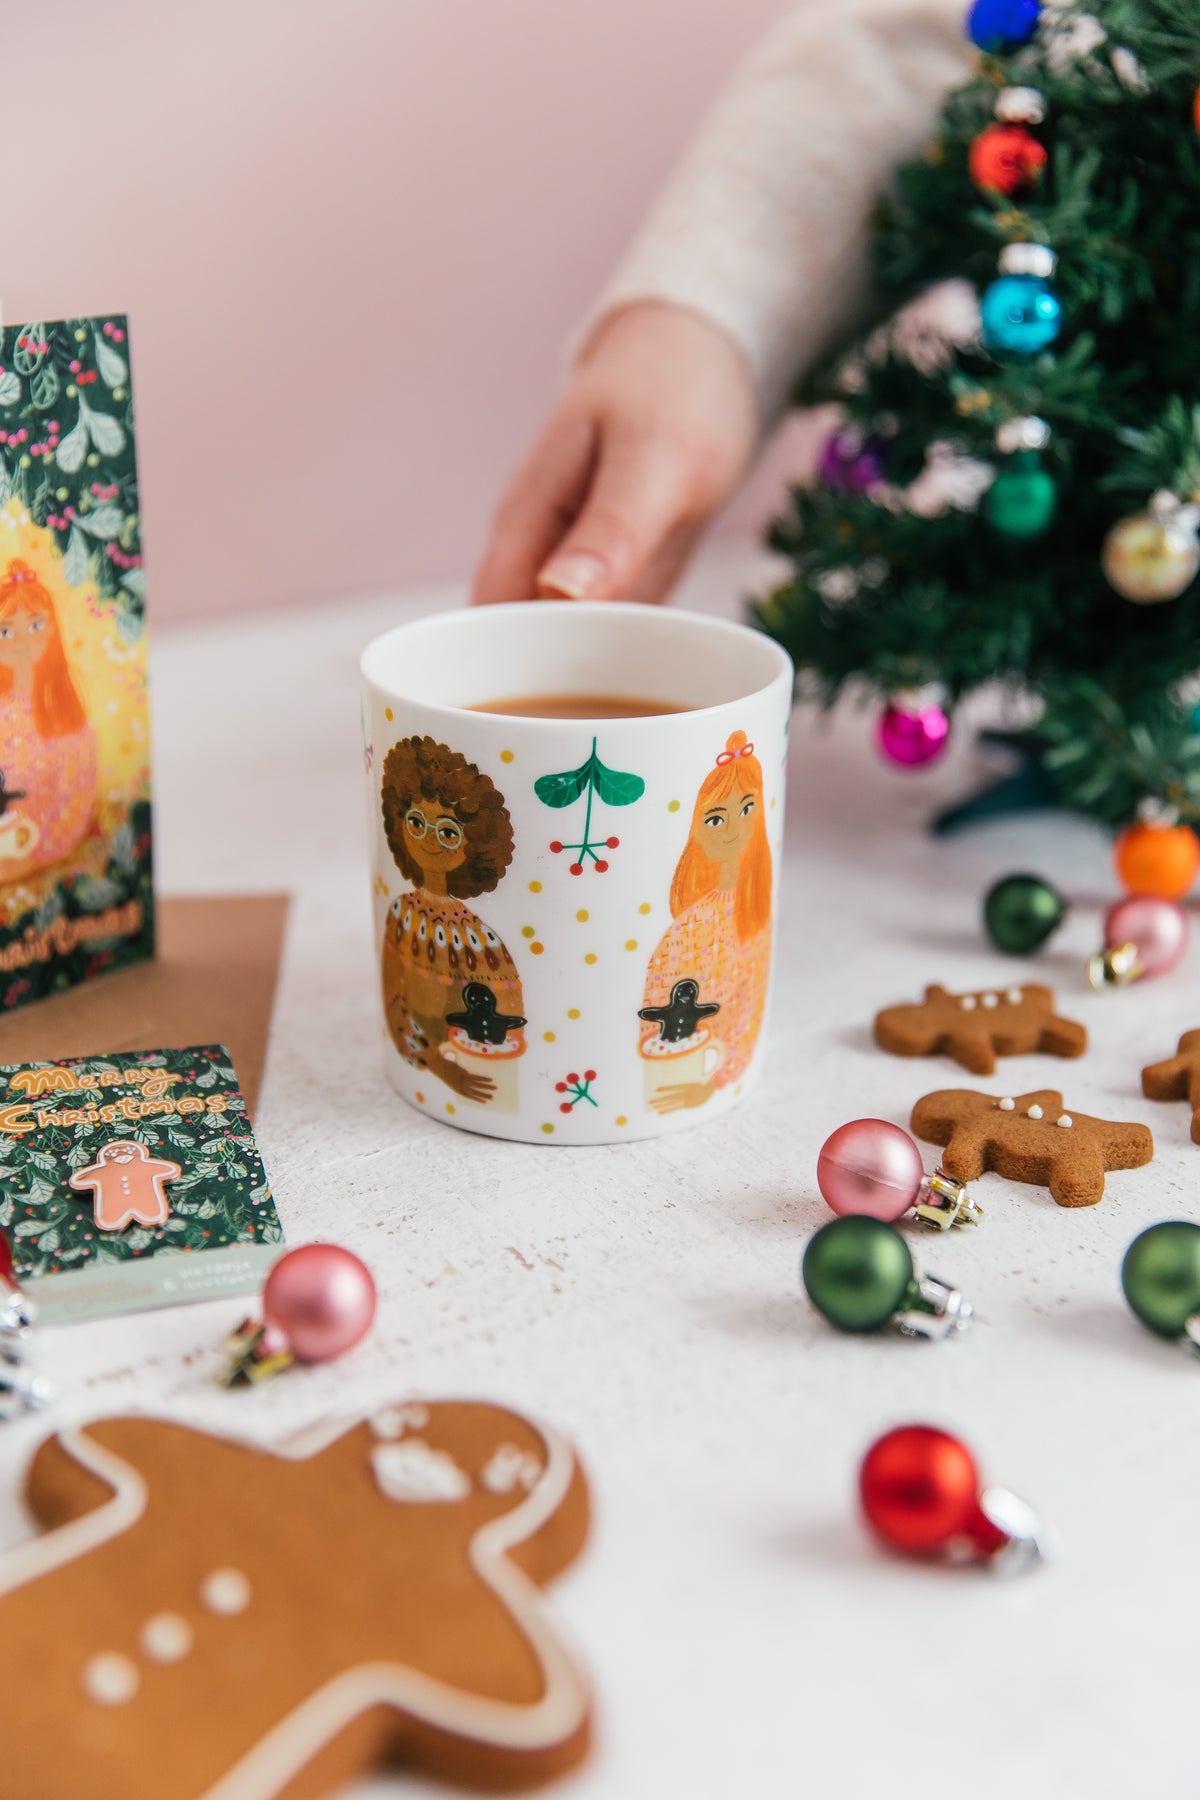 Girls with Gingerbread Mug & Gingerbread Person Gift Set